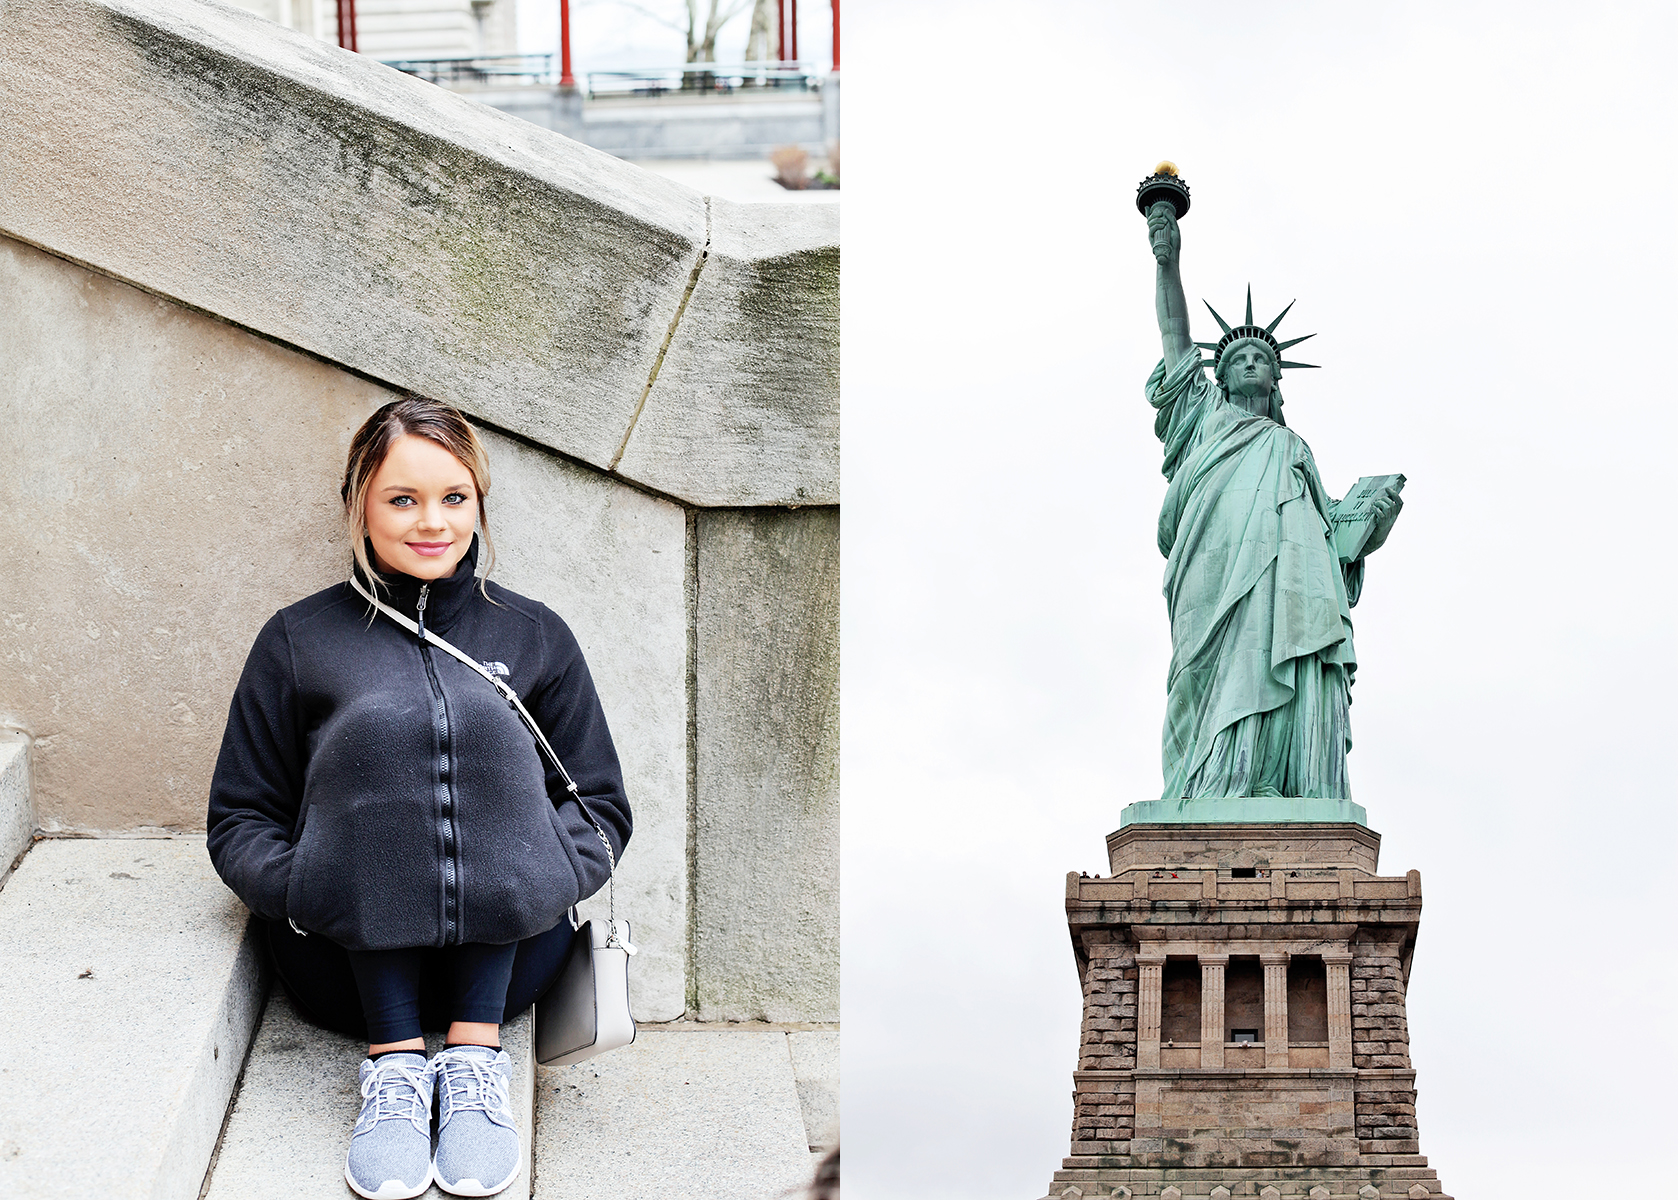 New York City - How to See the Statue of Liberty